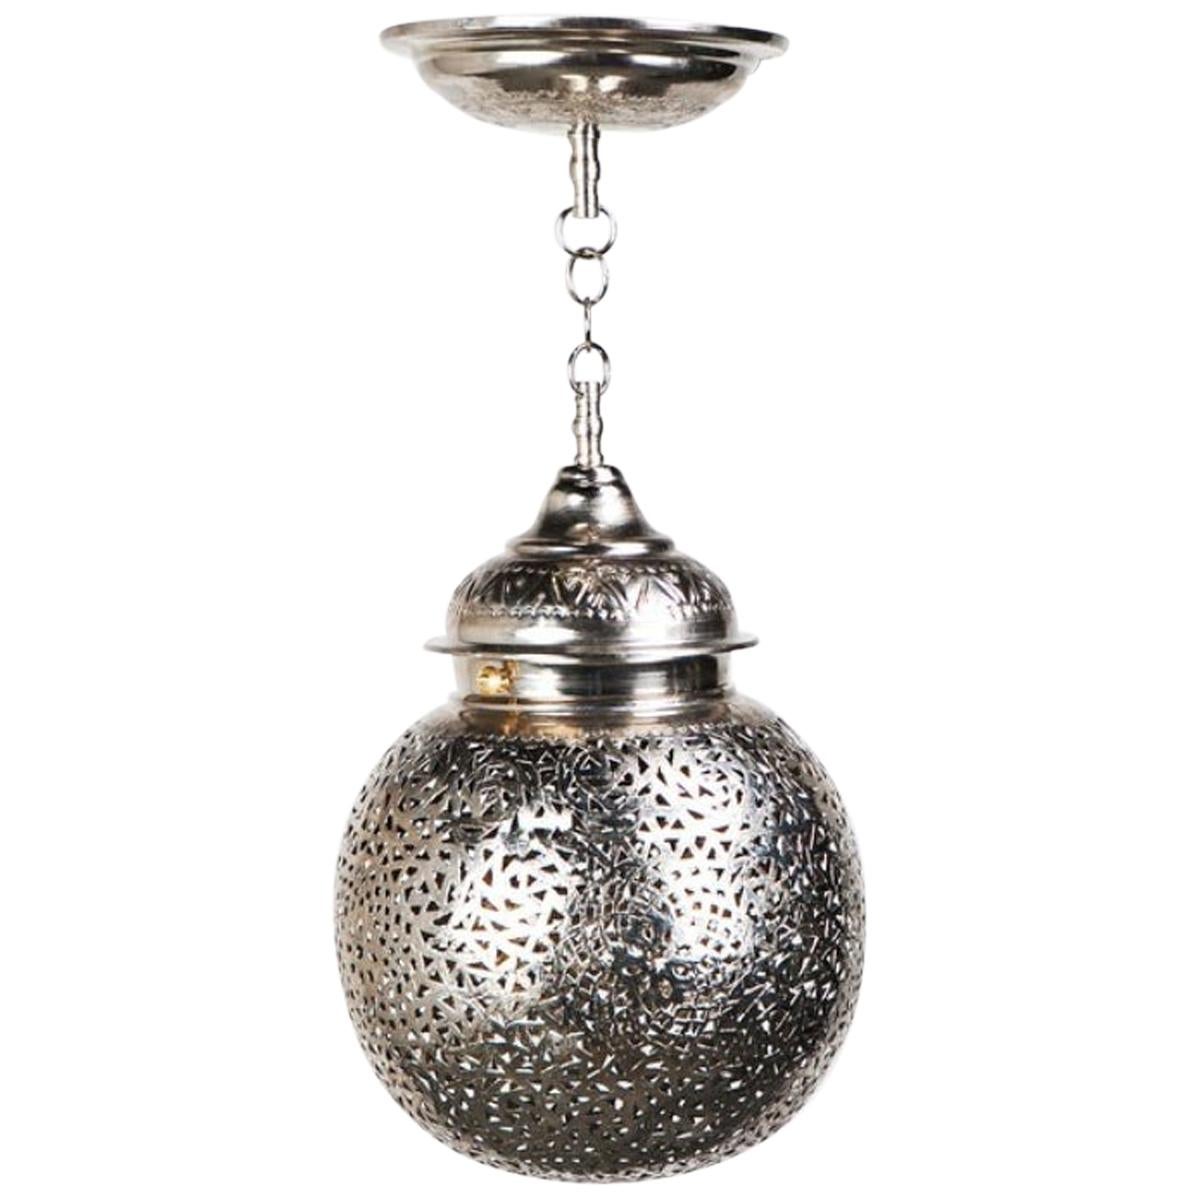 The pair of ball-shaped pendants or chandeliers are painstakingly created in the workshop of master artisans and features Fine white brass and intricate hand-tooled filigree work. This light-emitting orb produces a diffuse, filtered light, creating